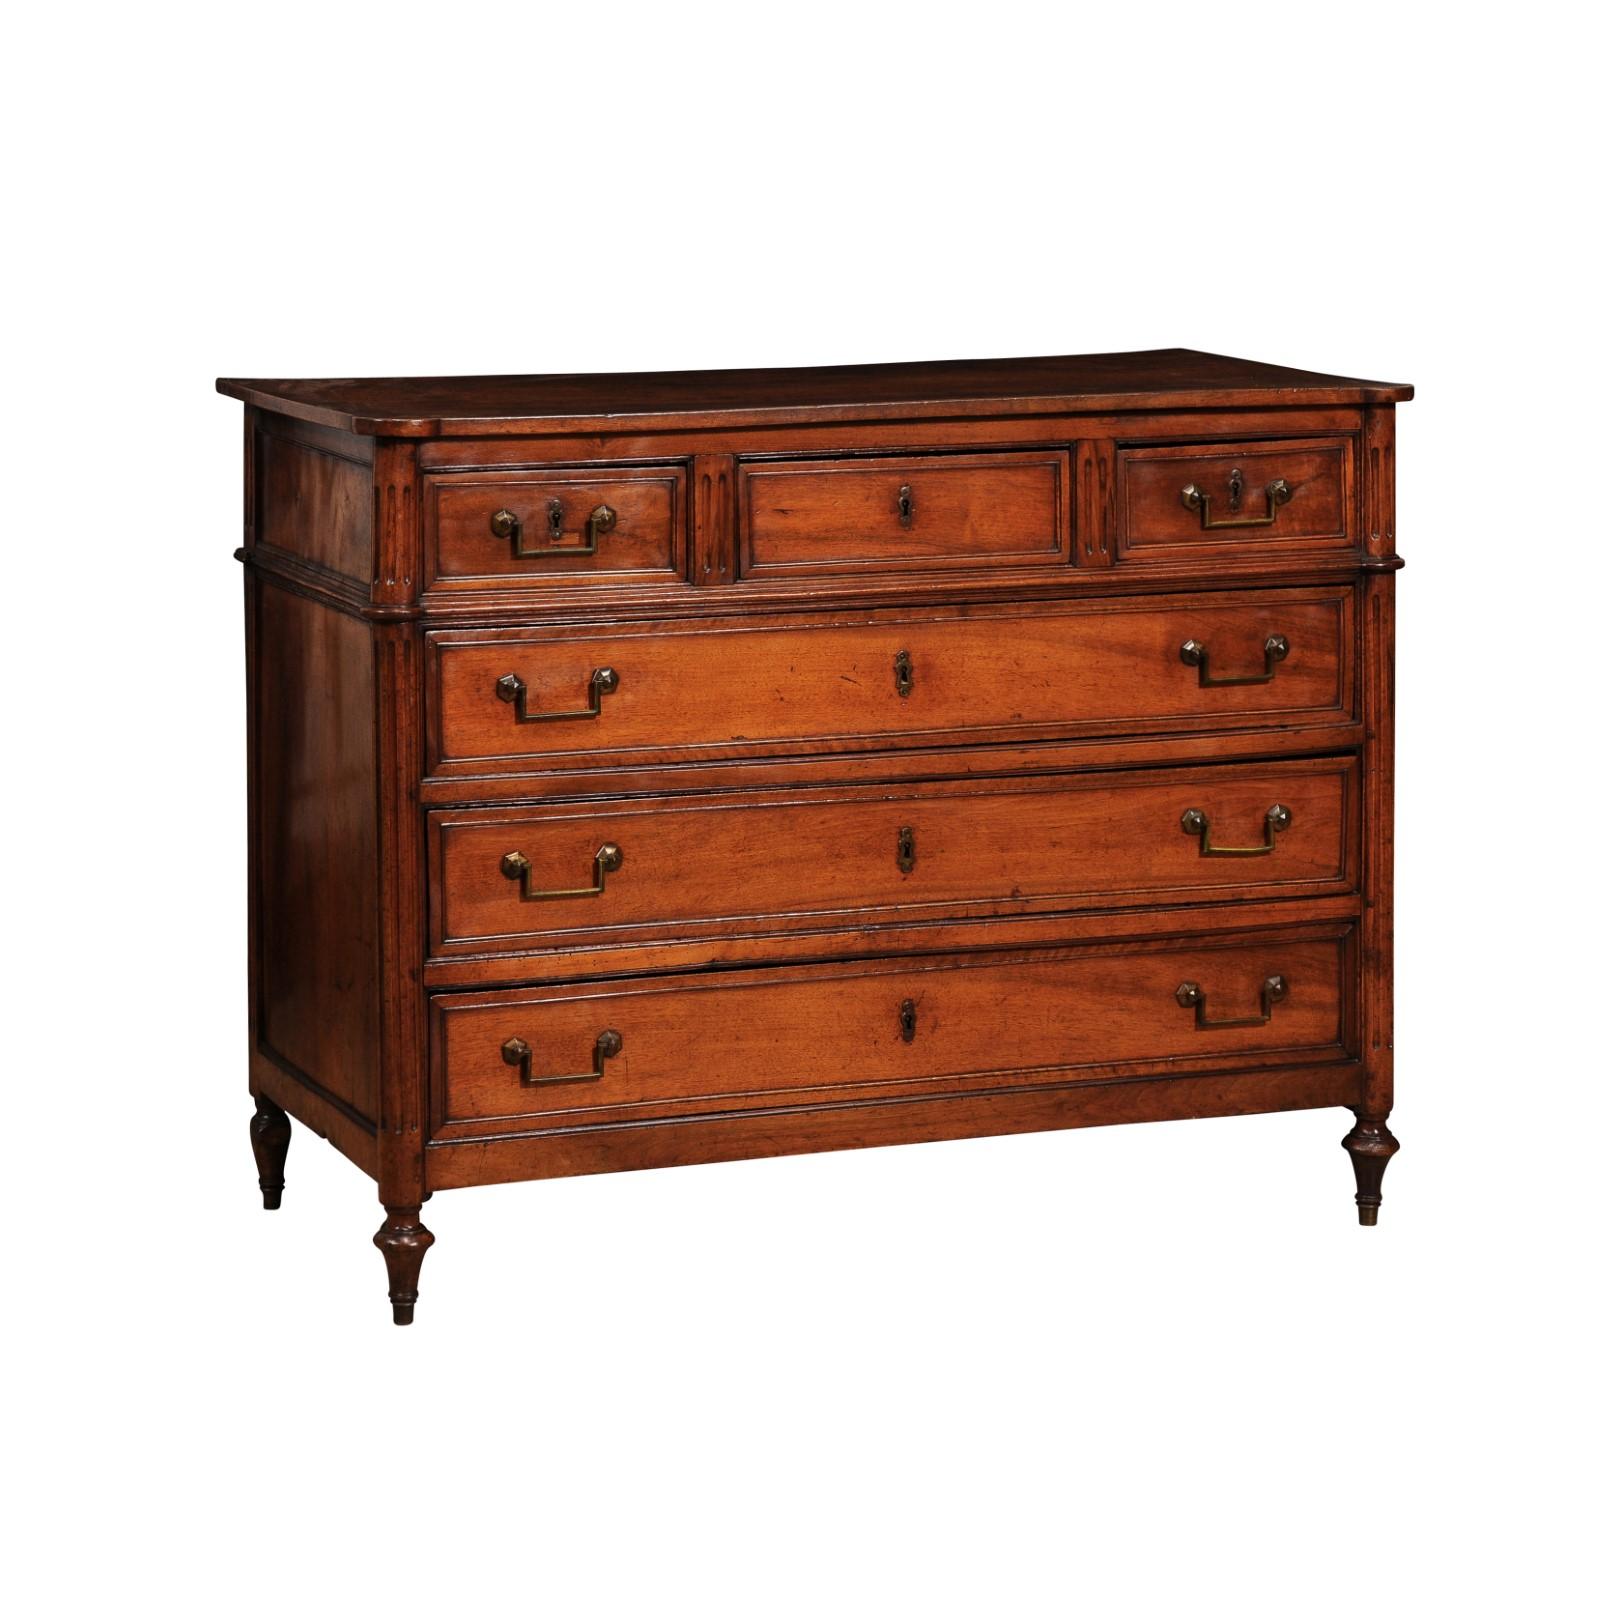 A French Louis XVI period walnut commode from circa 1790 with six drawers, rounded and fluted side posts, and turned elongated toupie legs. This French Louis XVI period walnut commode, dating back to circa 1790, is an exquisite representation of